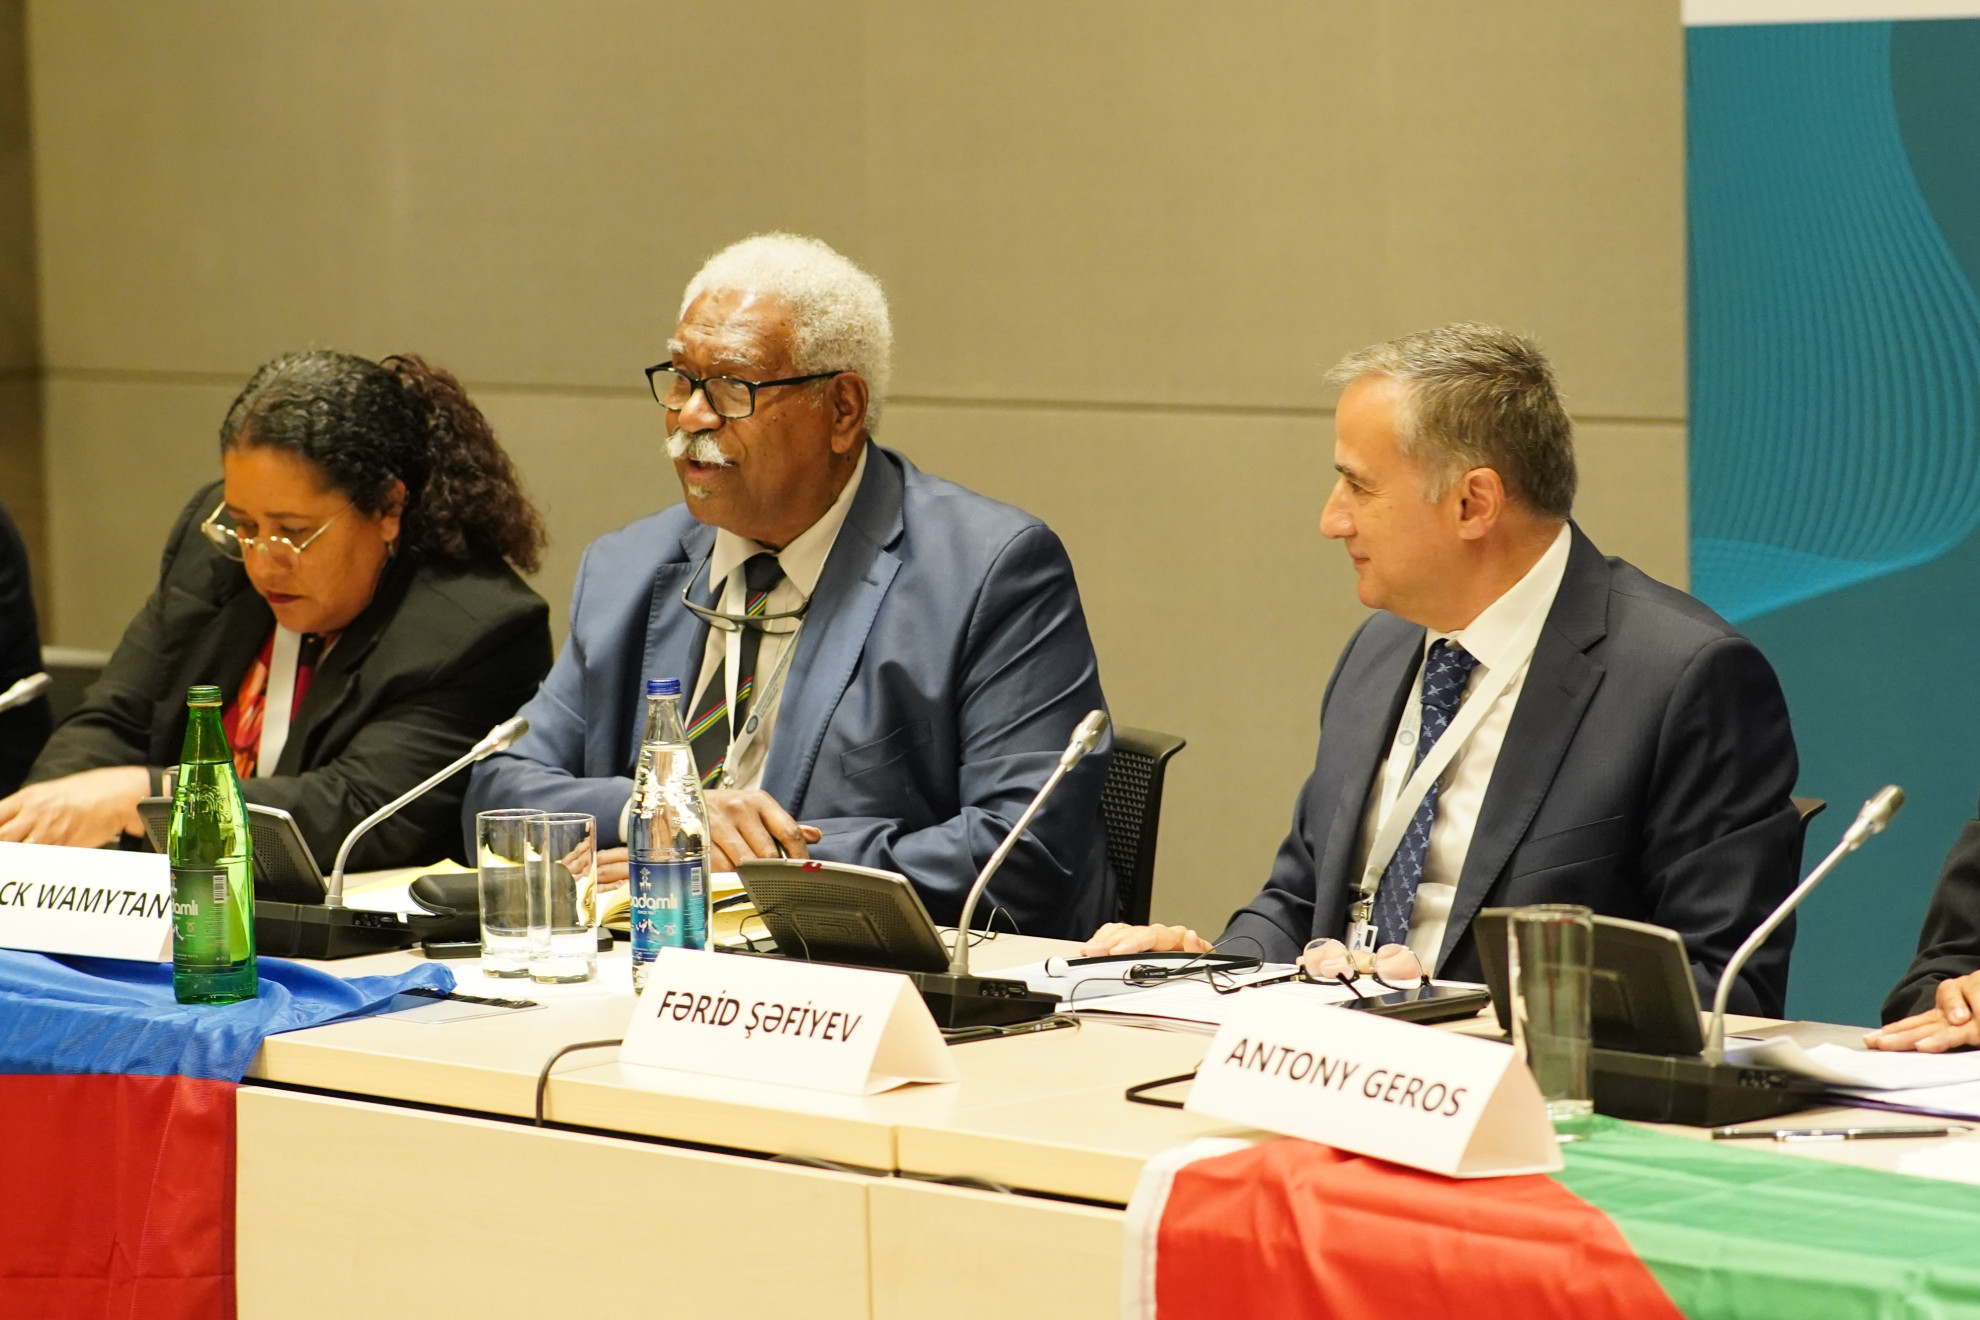 Round table on “Towards Complete Elimination of Colonialism” was organized by the AIR Center